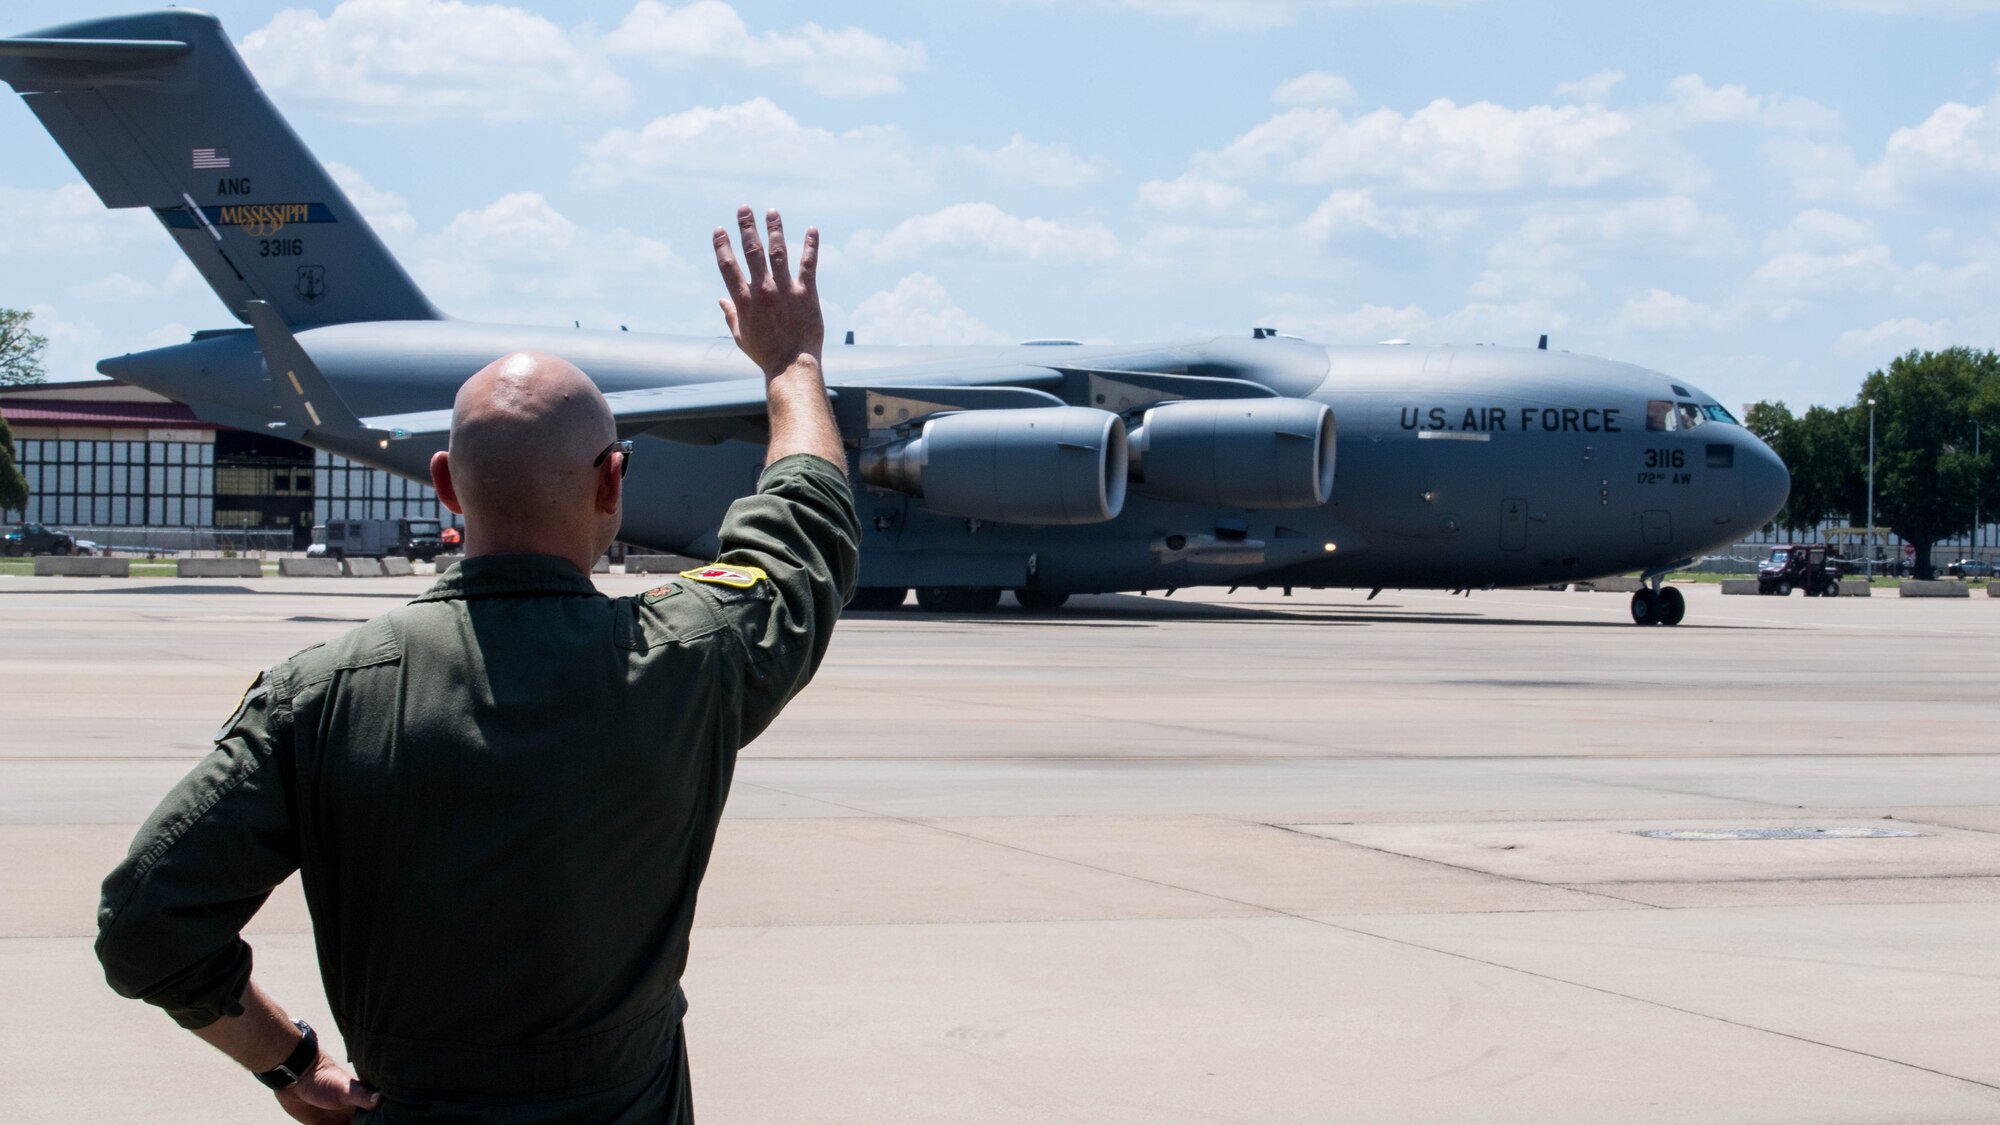 Maj. John R. Blankenship, a B-52 Stratofortress pilot with the 96th Bomb Squadron, waves to his wife Maj. Natasha E. Blankenship, a C-17 Globemaster III pilot with the 183rd Airlift Squadron in Jackson, Mississippi, as she lands a C-17 as apart of the Barksdale Defenders of Liberty Air Show at Barksdale Air Force Base, La., May 16, 2019. Natasha Blankenship is a prior active duty pilot who now flies for the Mississippi Air National Guard. (U.S. Air Force photo by Airman Jacob B. Wrightsman)